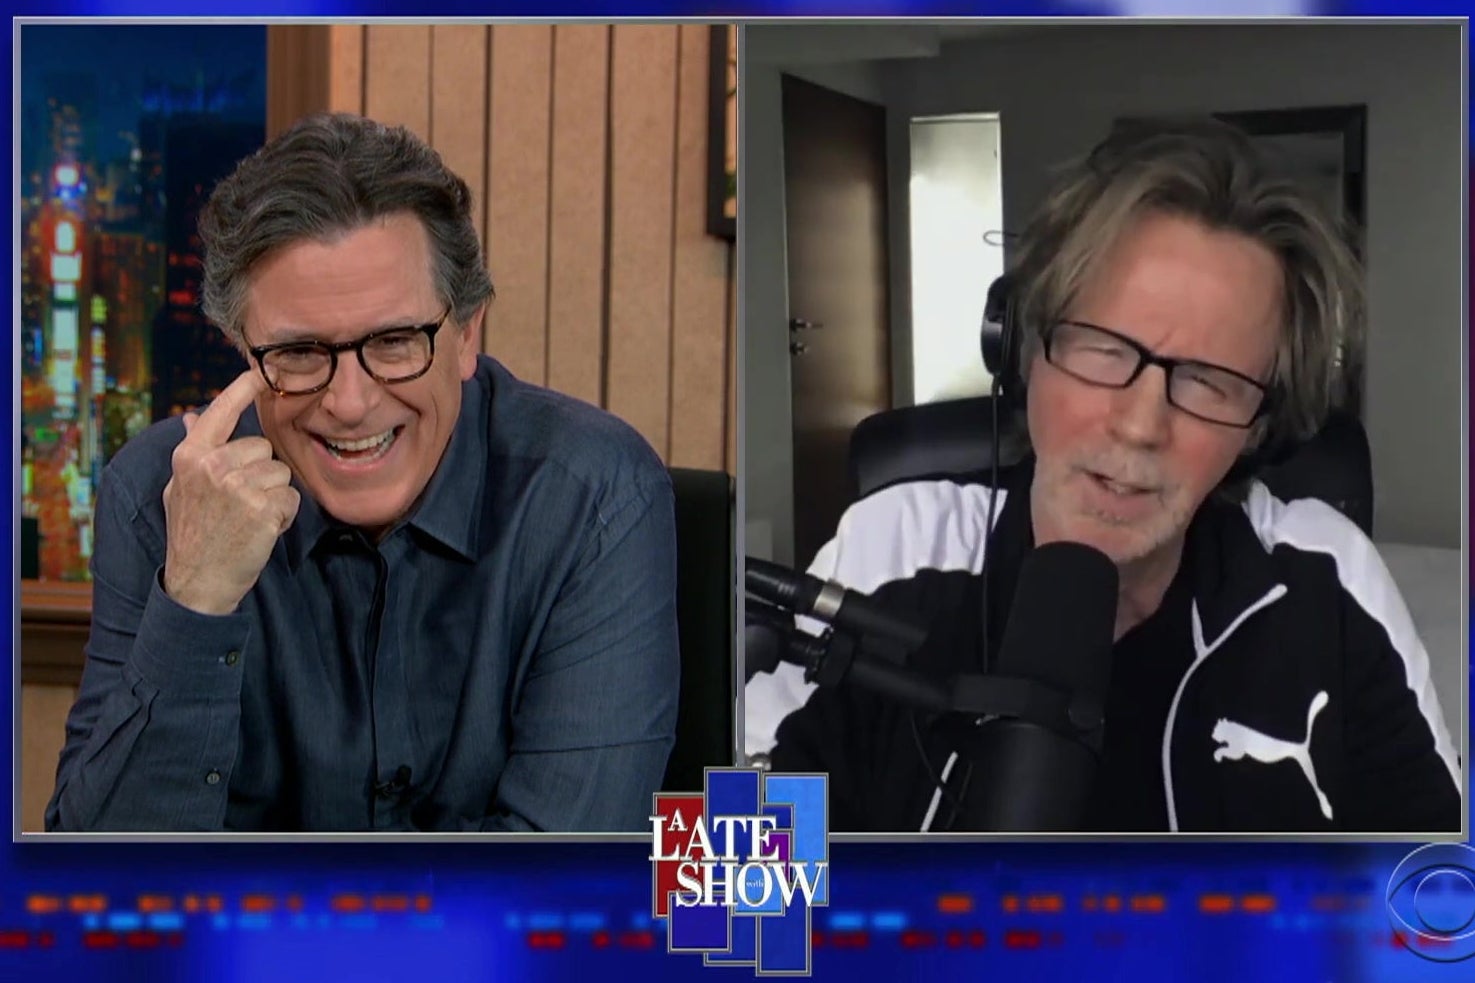 A split screen showing Stephen COlbert in one view, laughing, and Dana Carvey, in a black and white Puma track suit, impersonating Joe Biden.